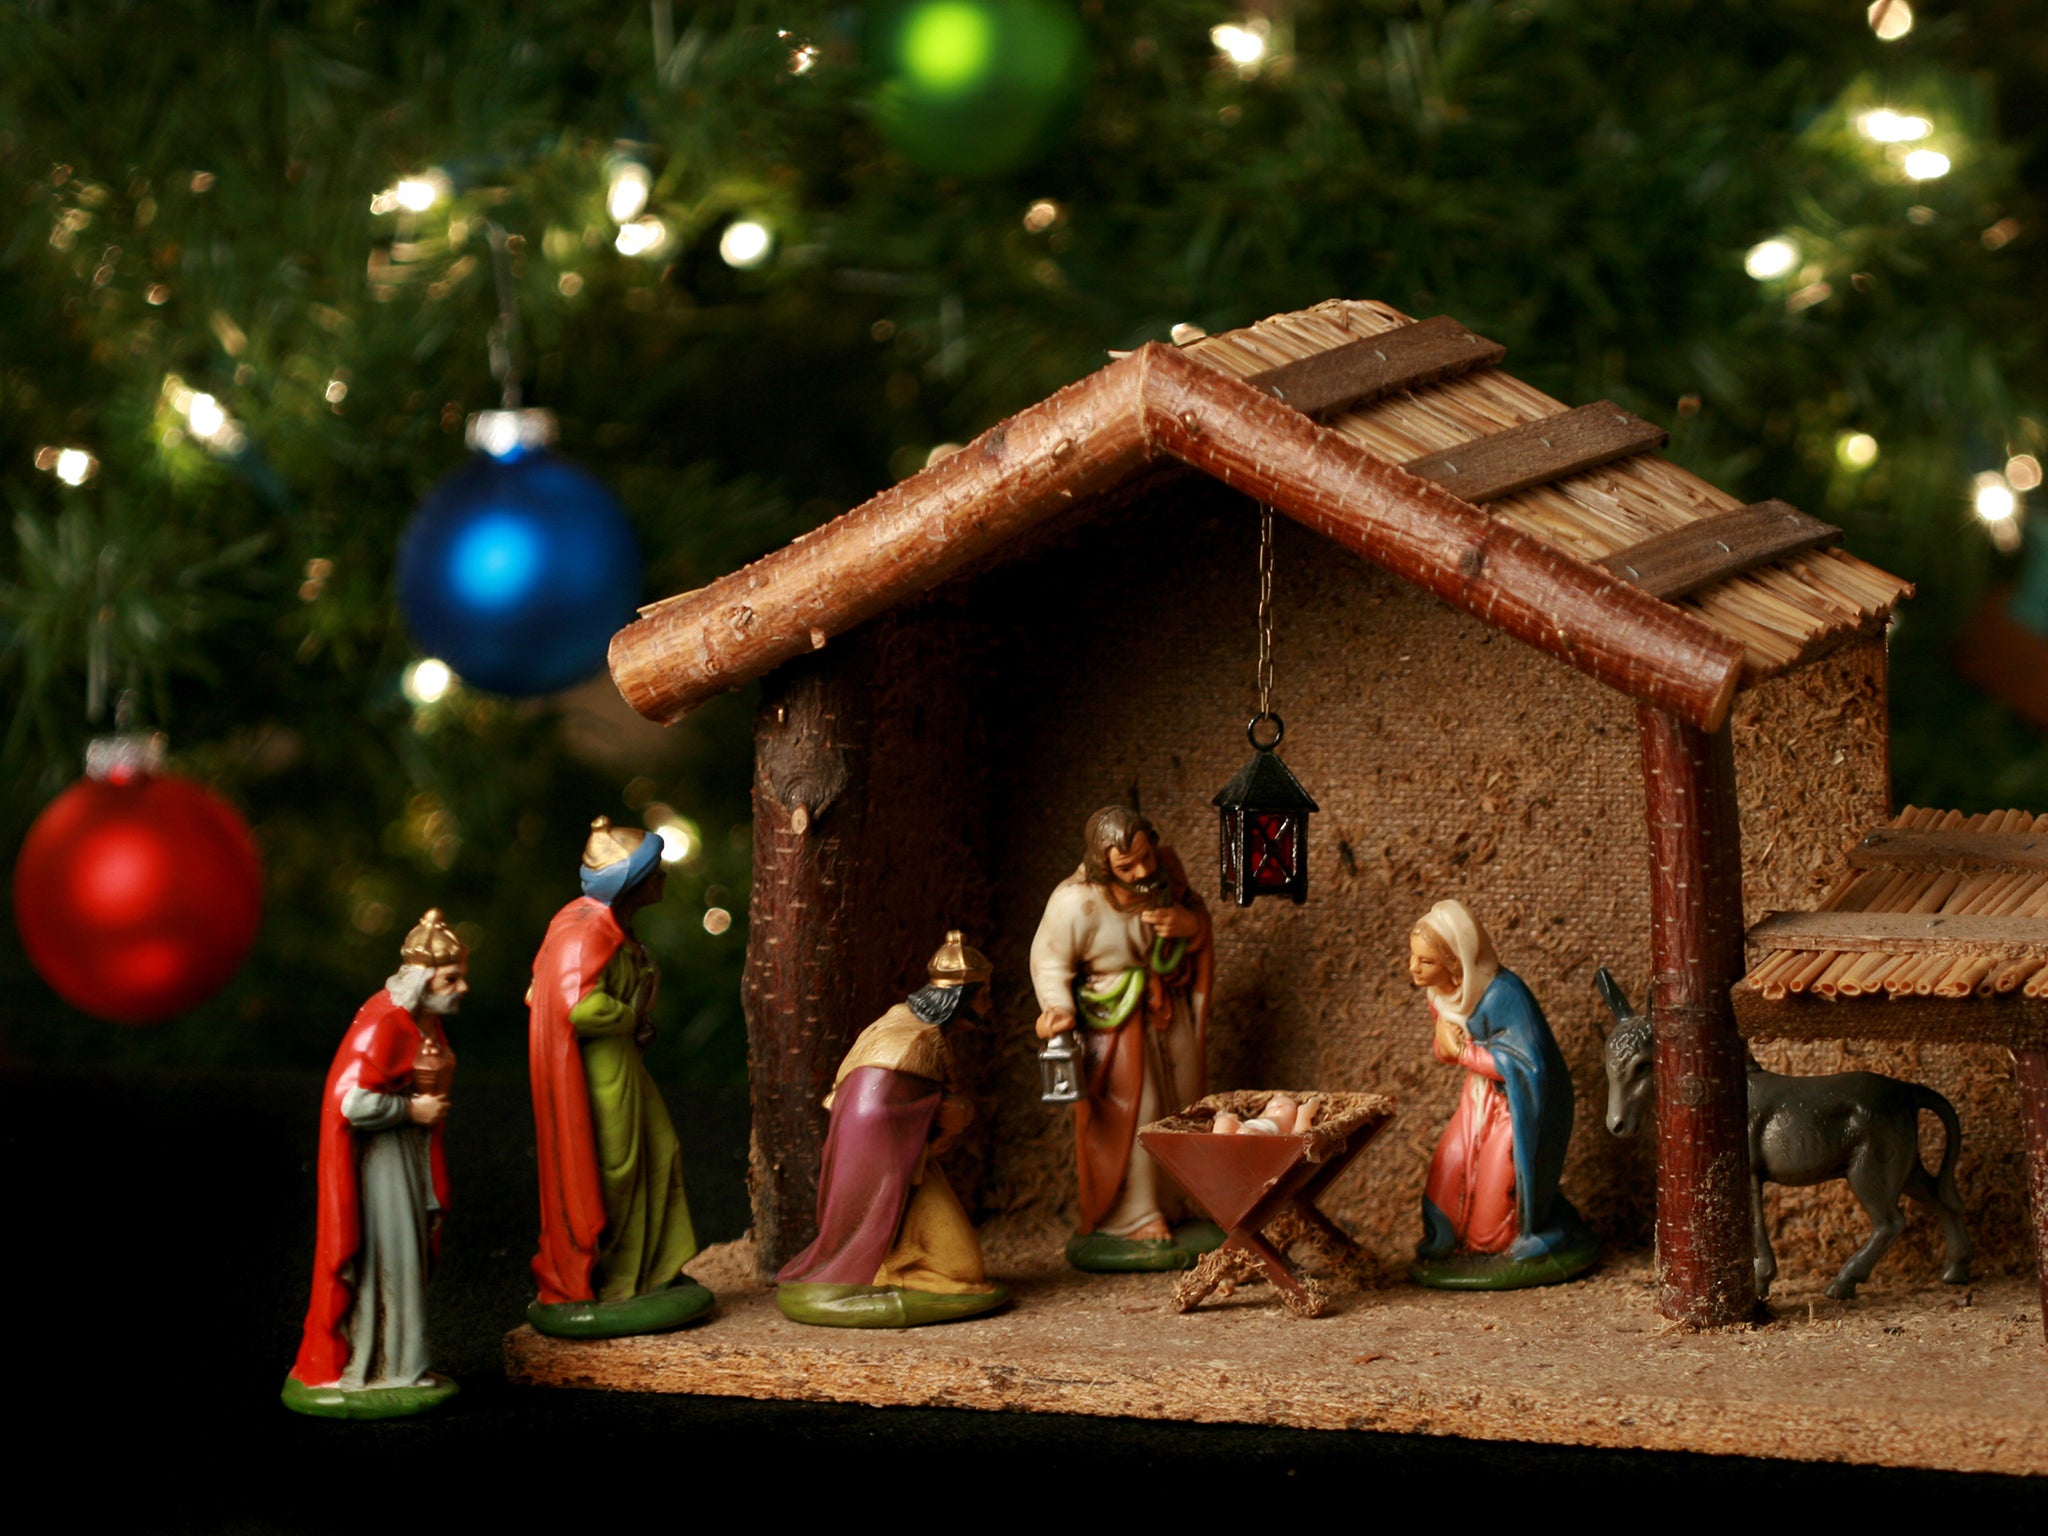 From the nativity scene to Christmas cards, the Virgin Mary is ubiquitous at Christmas